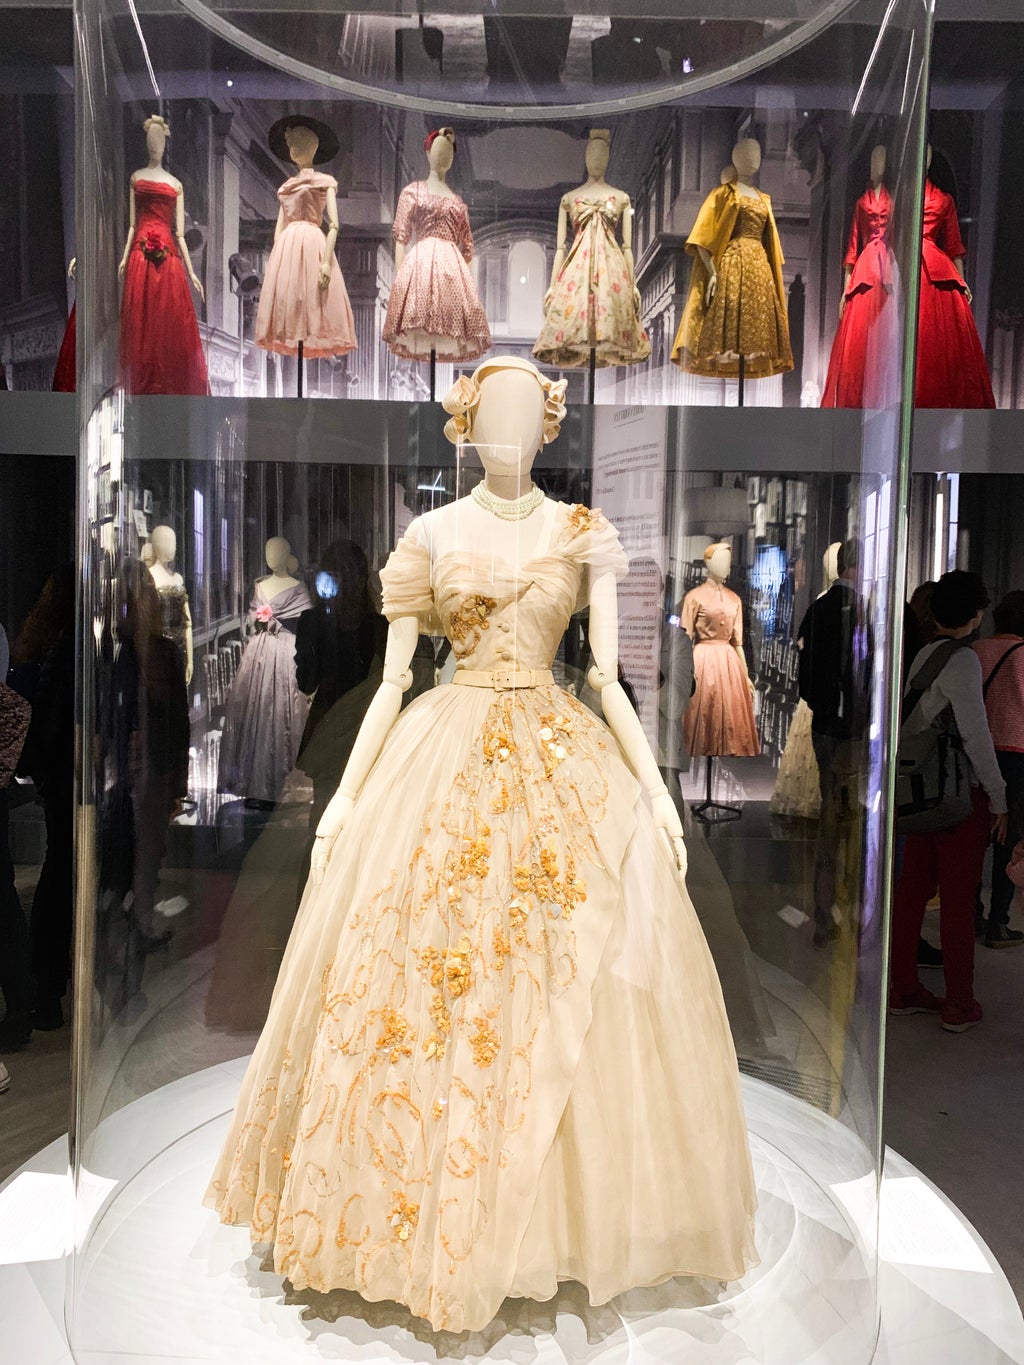 Pictures I took from Christian Dior\'s Designer of Dreams exhibit in London.